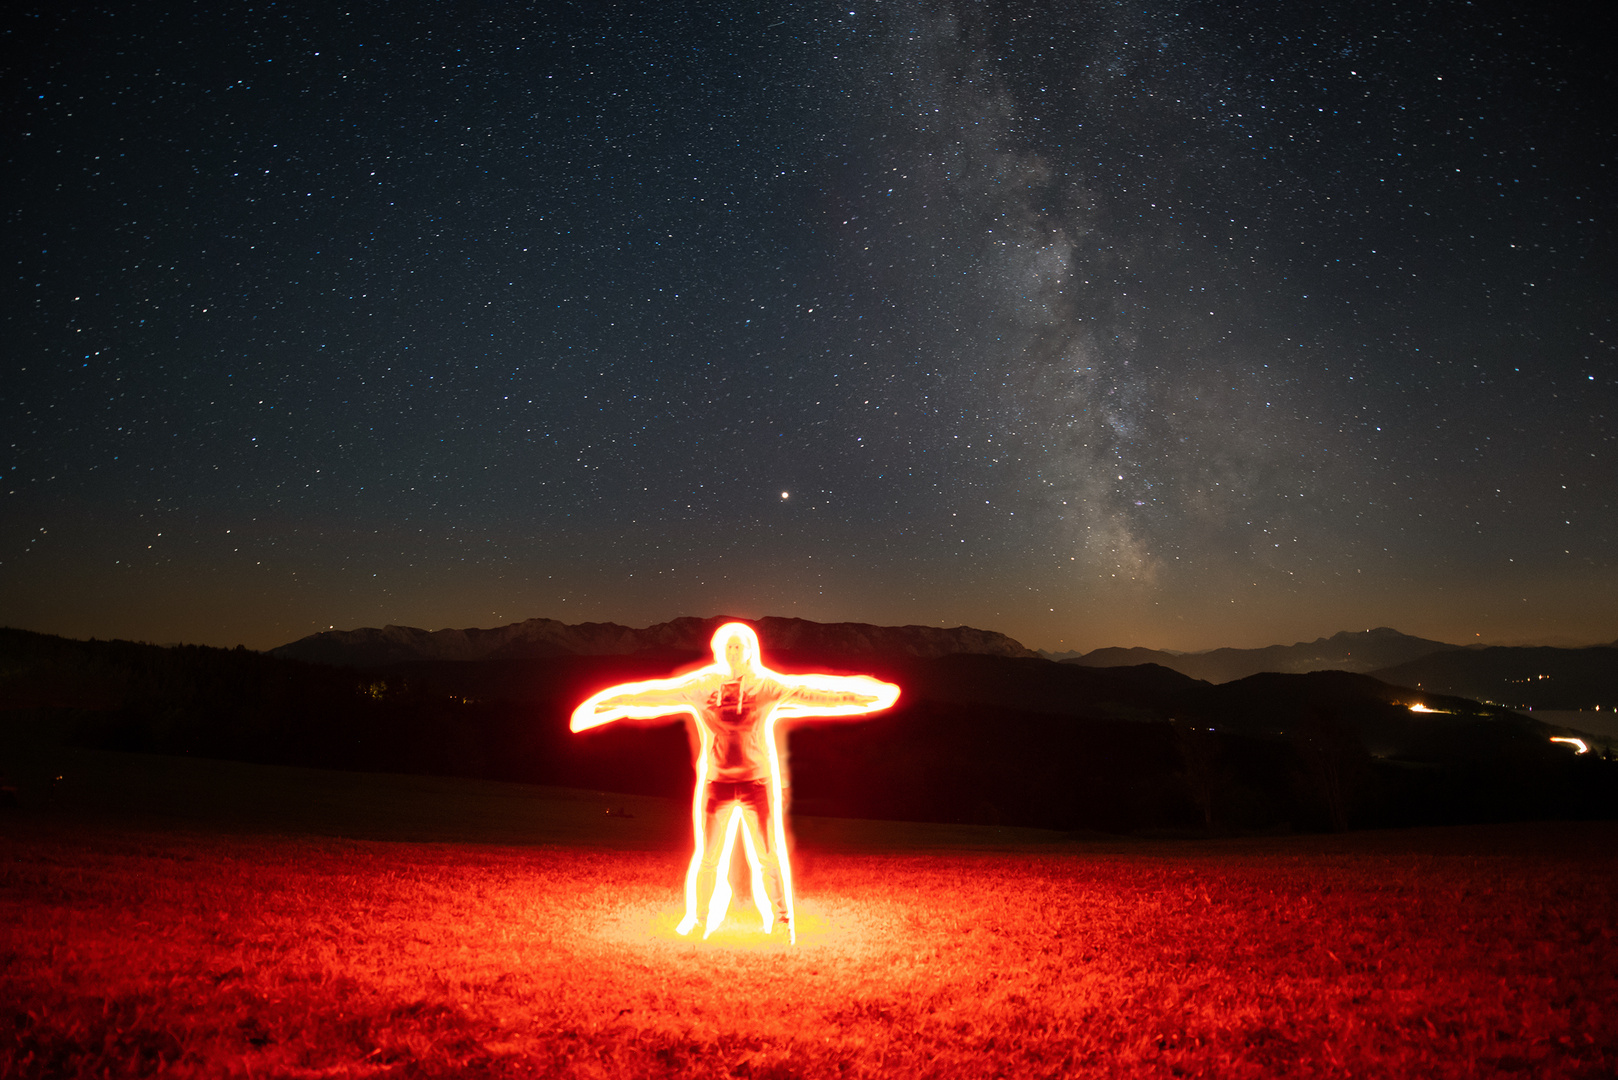 burning man and the Milky Way